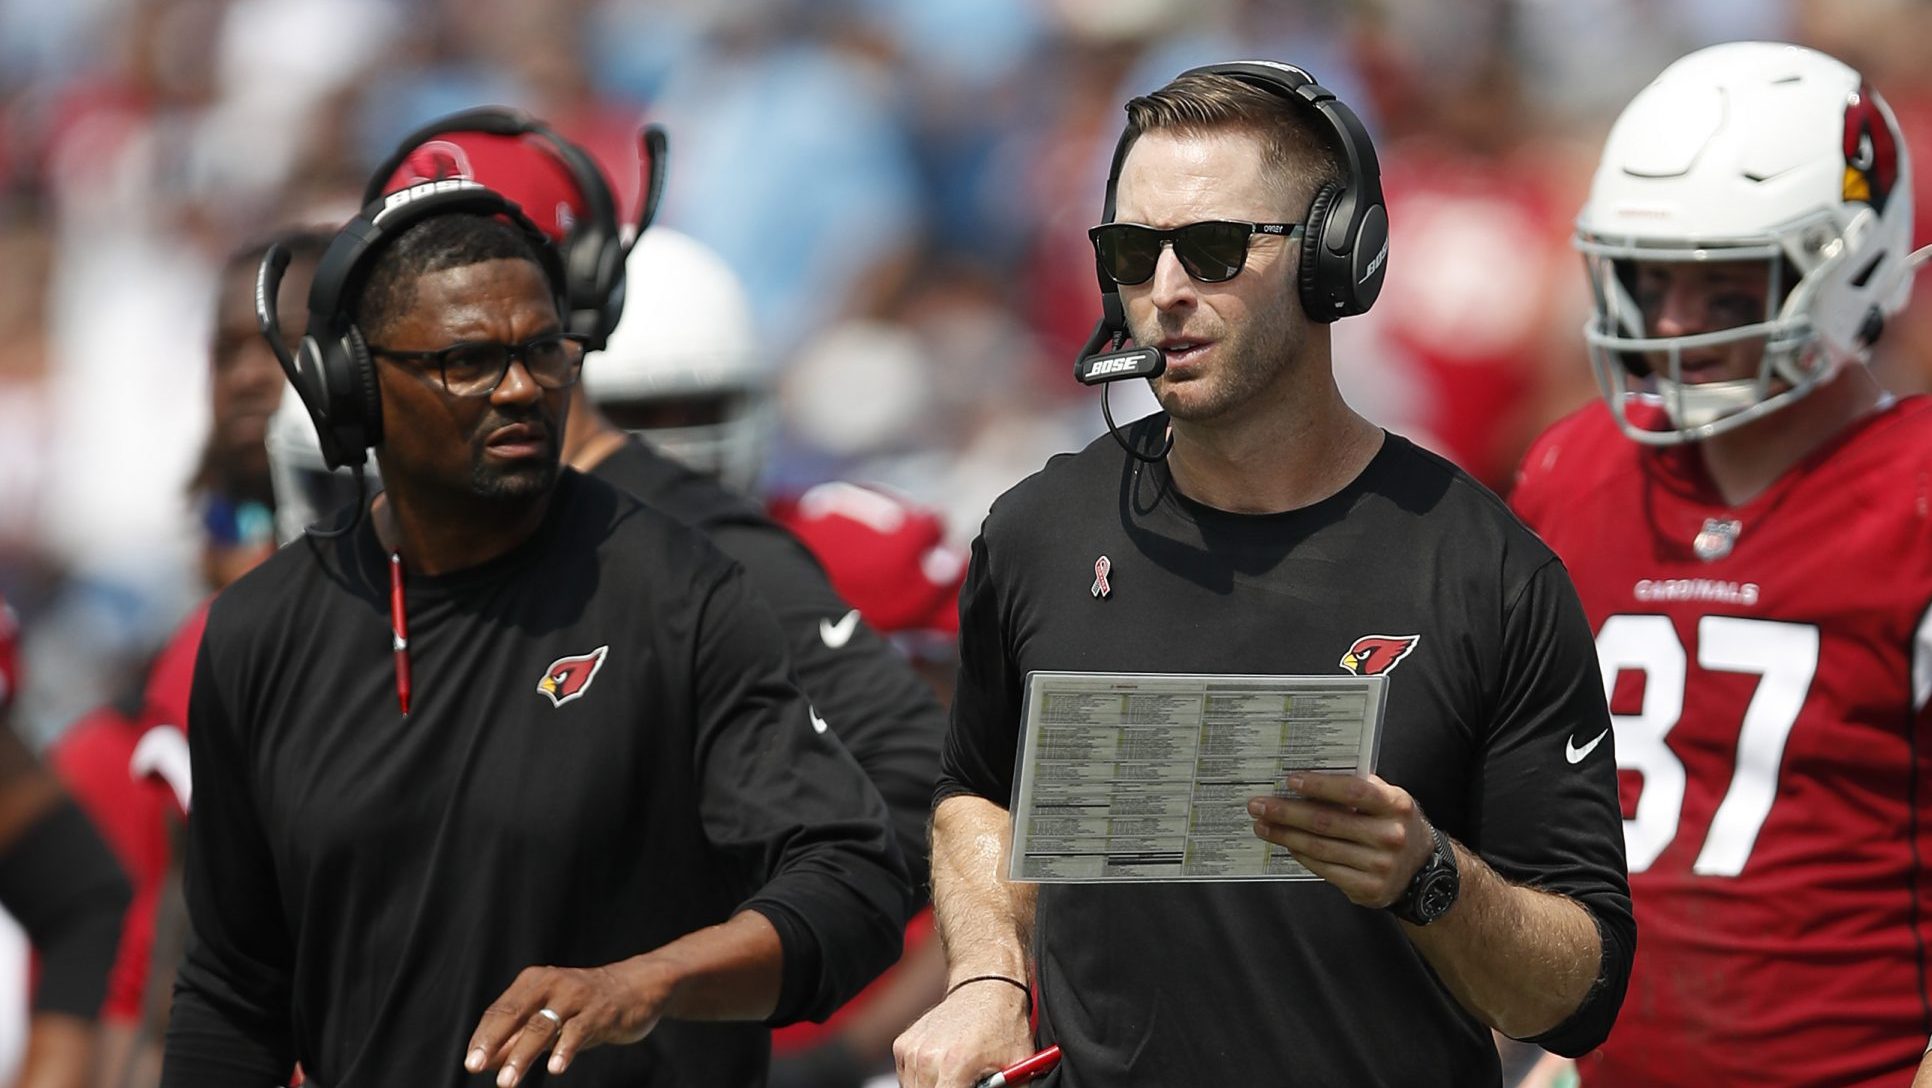 Wide receivers coach Shawn Jefferson (left) and head coach Kliff Kingsbury (right) of the Arizona C...